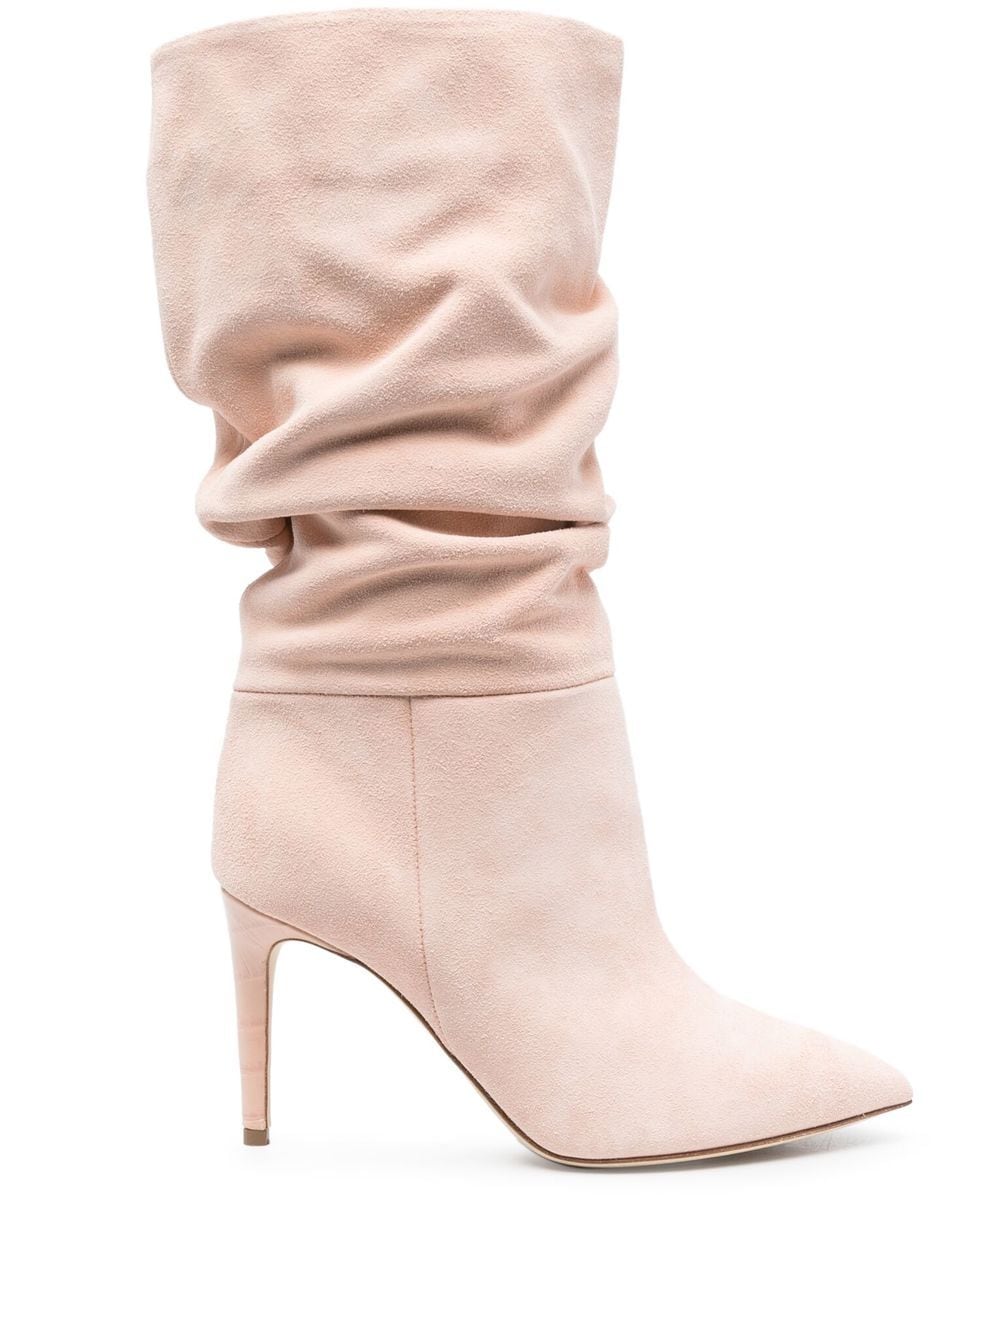 Paris Texas 95mm Slouchy Suede Boots In Pink